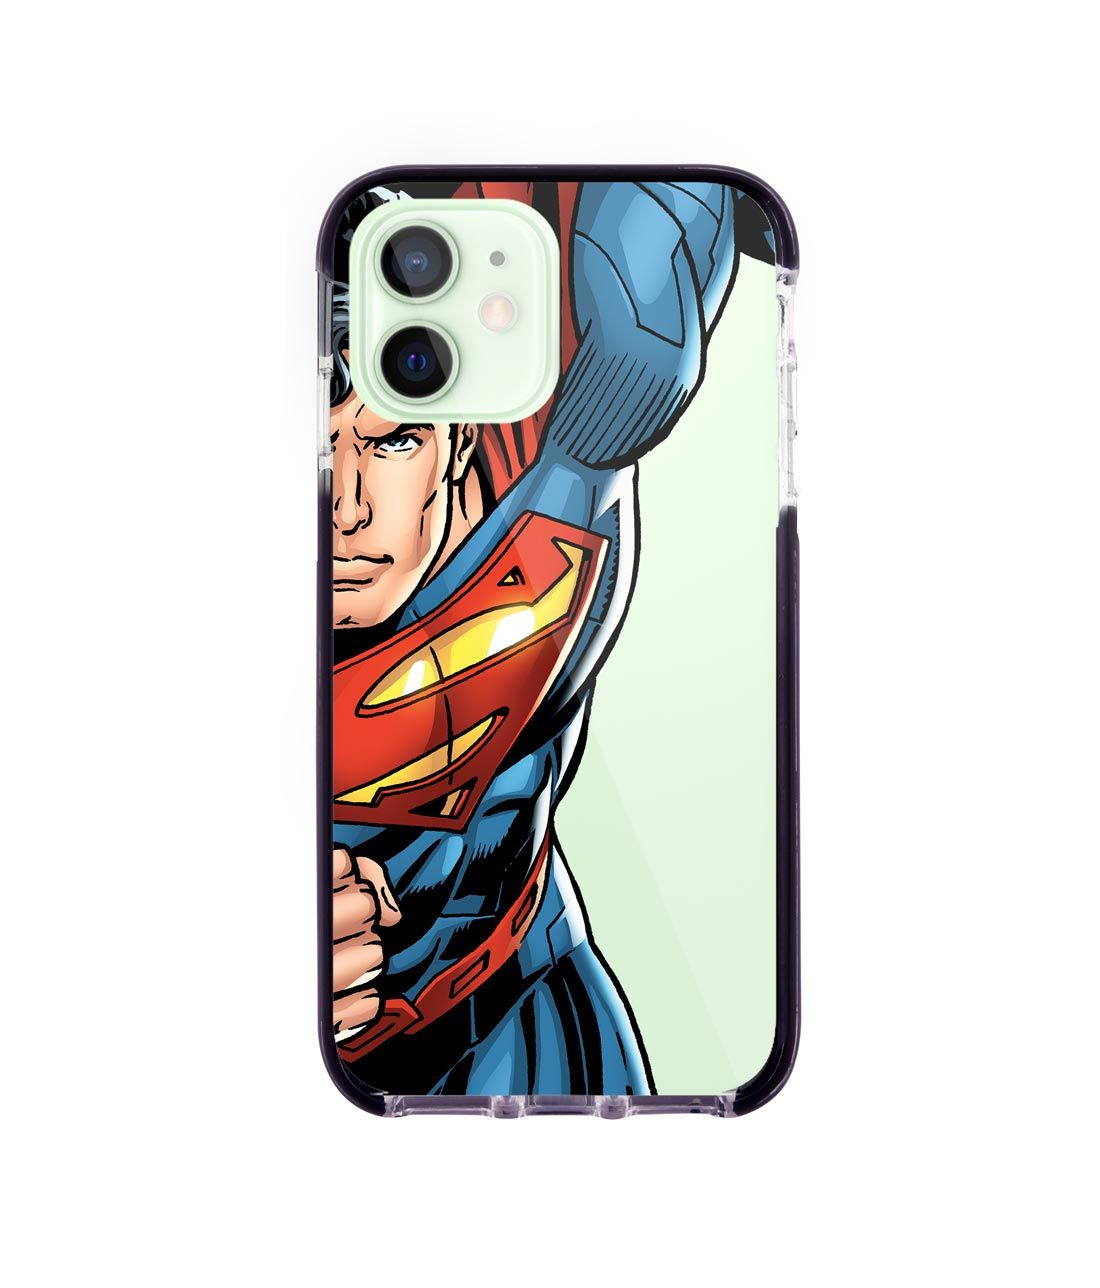 Speed it like Superman - Extreme Case for iPhone 12 Mini